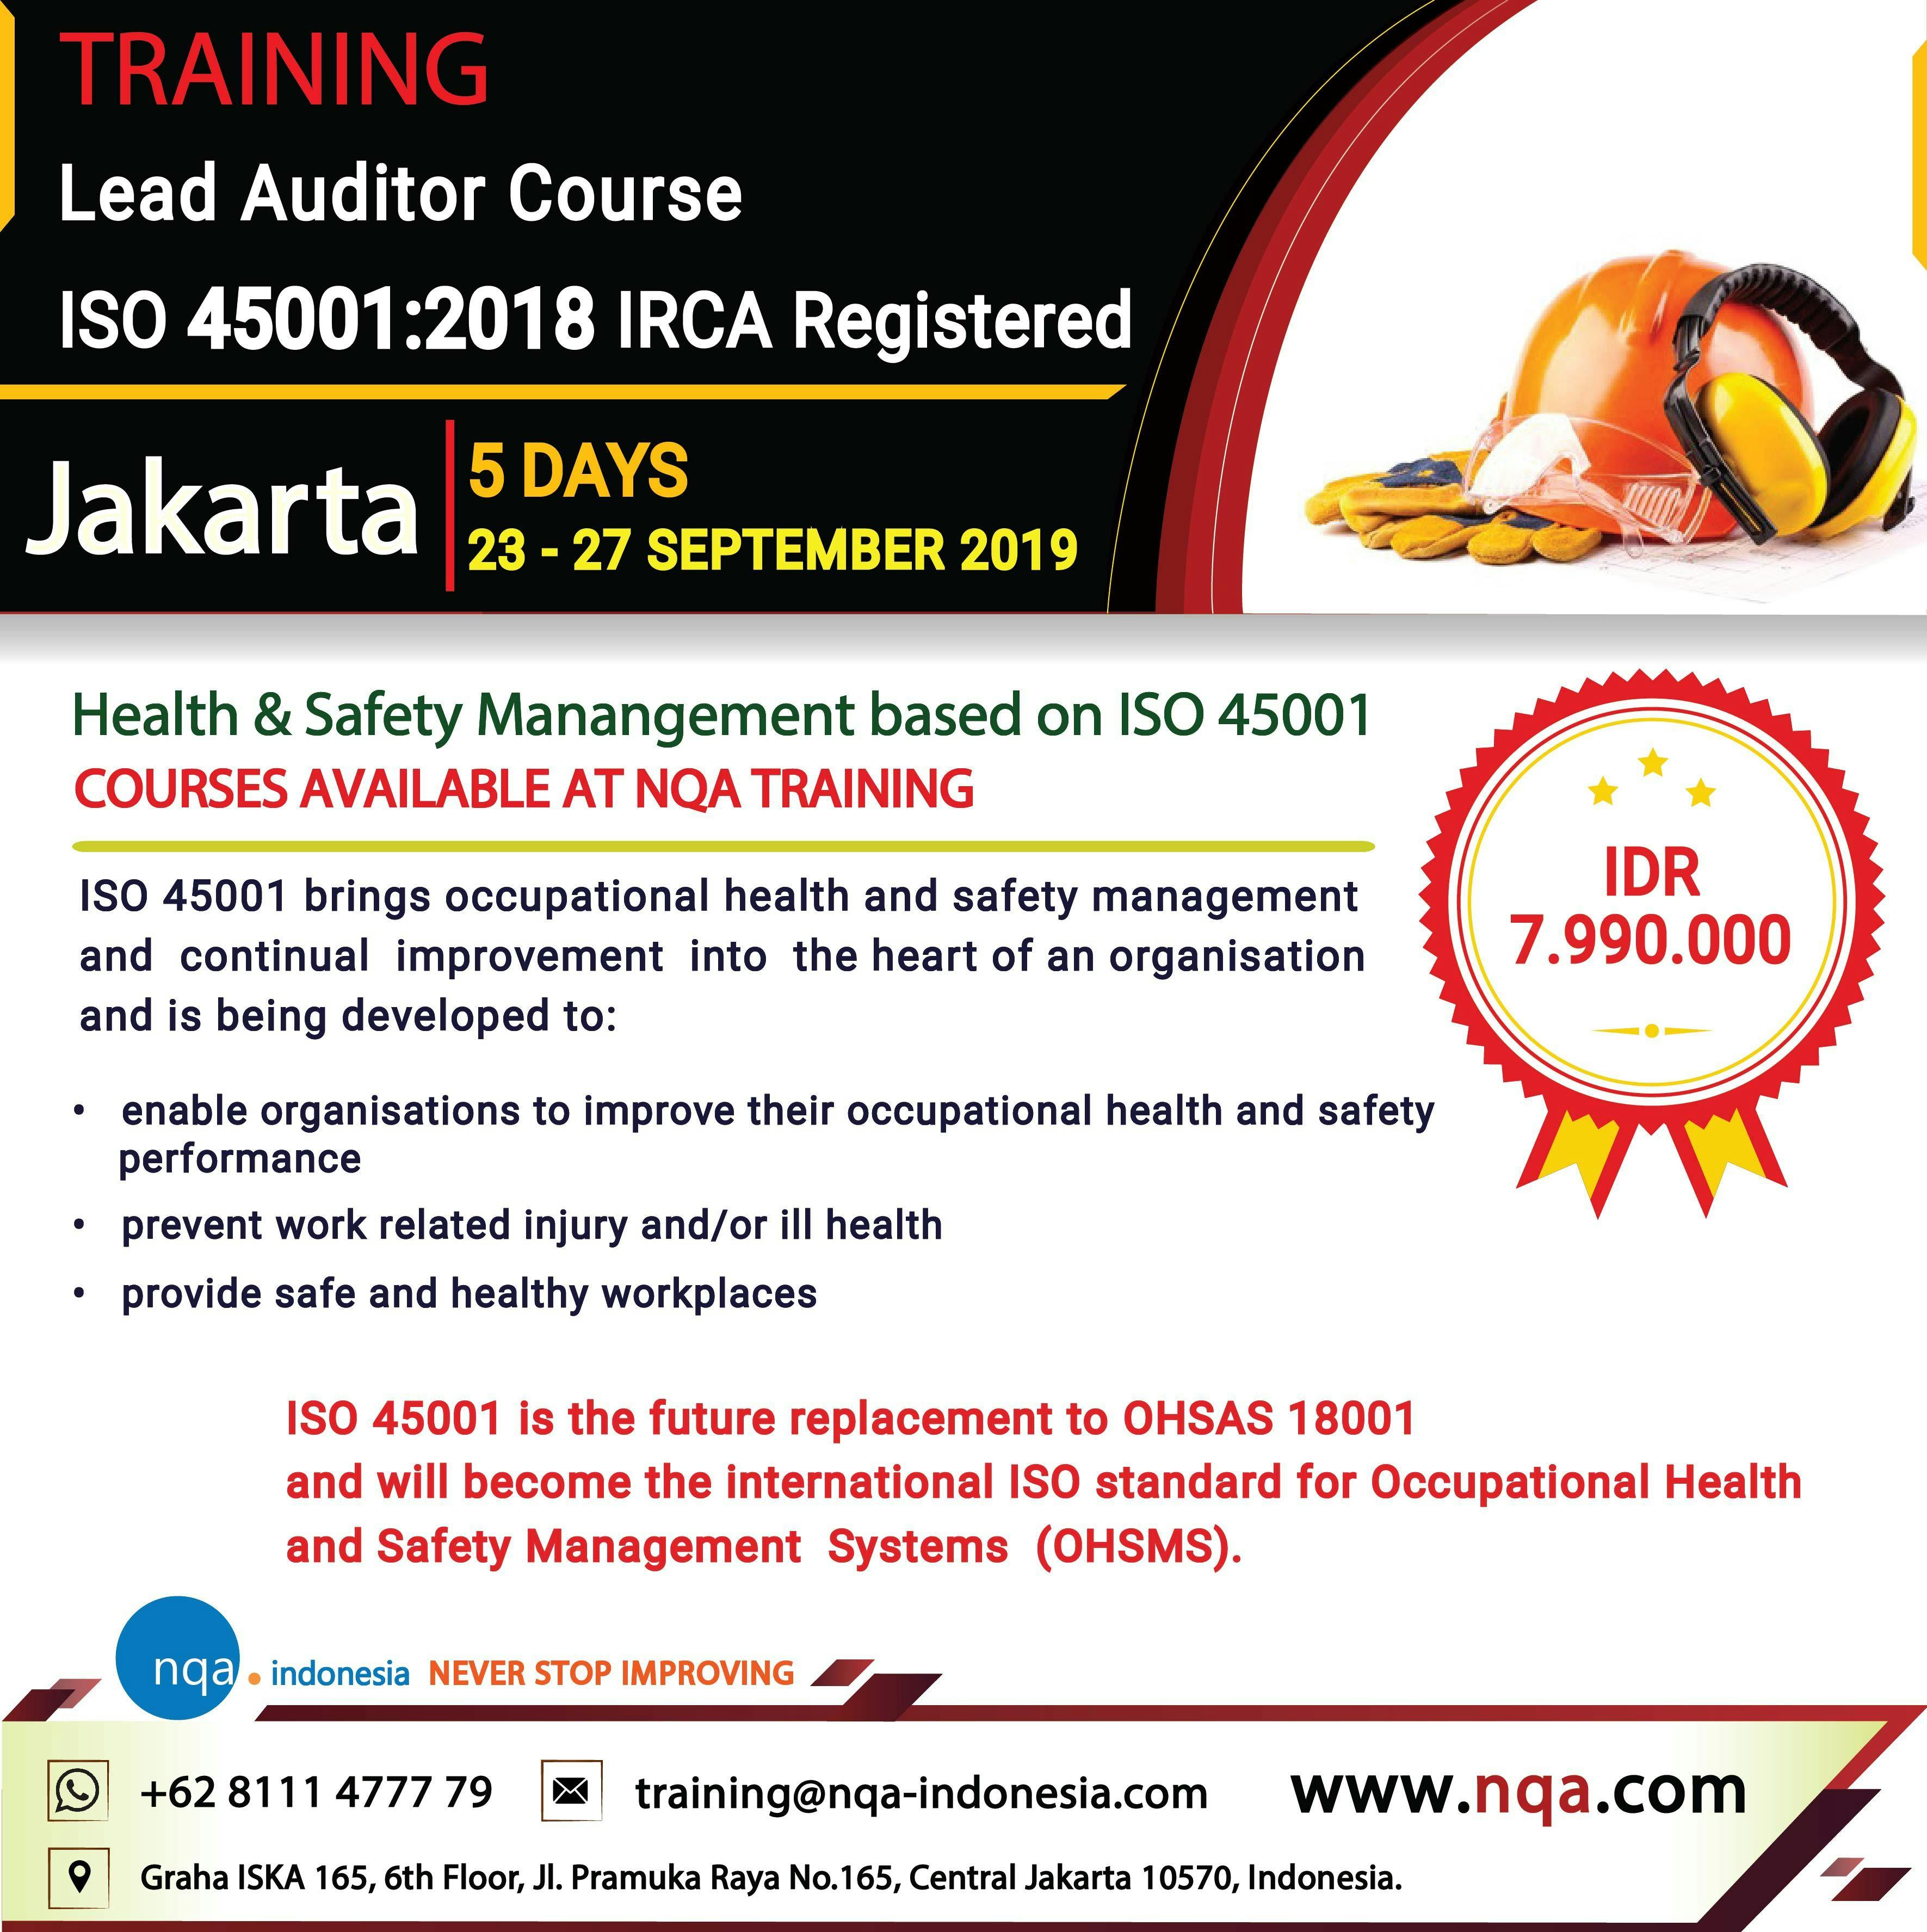 Lead Auditor Course ISO 45001 (IRCA Certified)- (IDR 7.990.000,-)